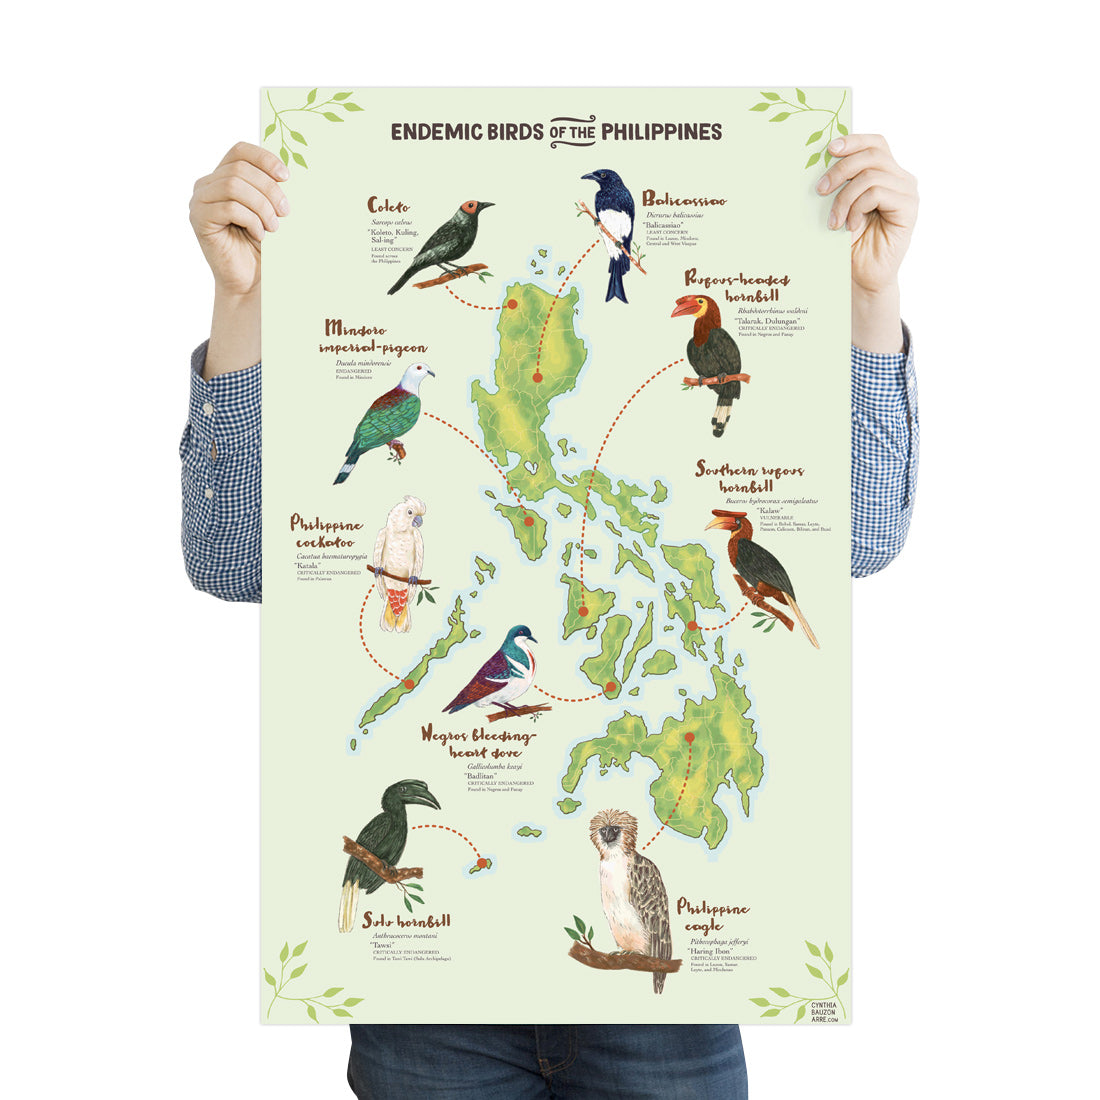 Endemic Birds of the Philippines Poster by Cynthia Bauzon-Arre